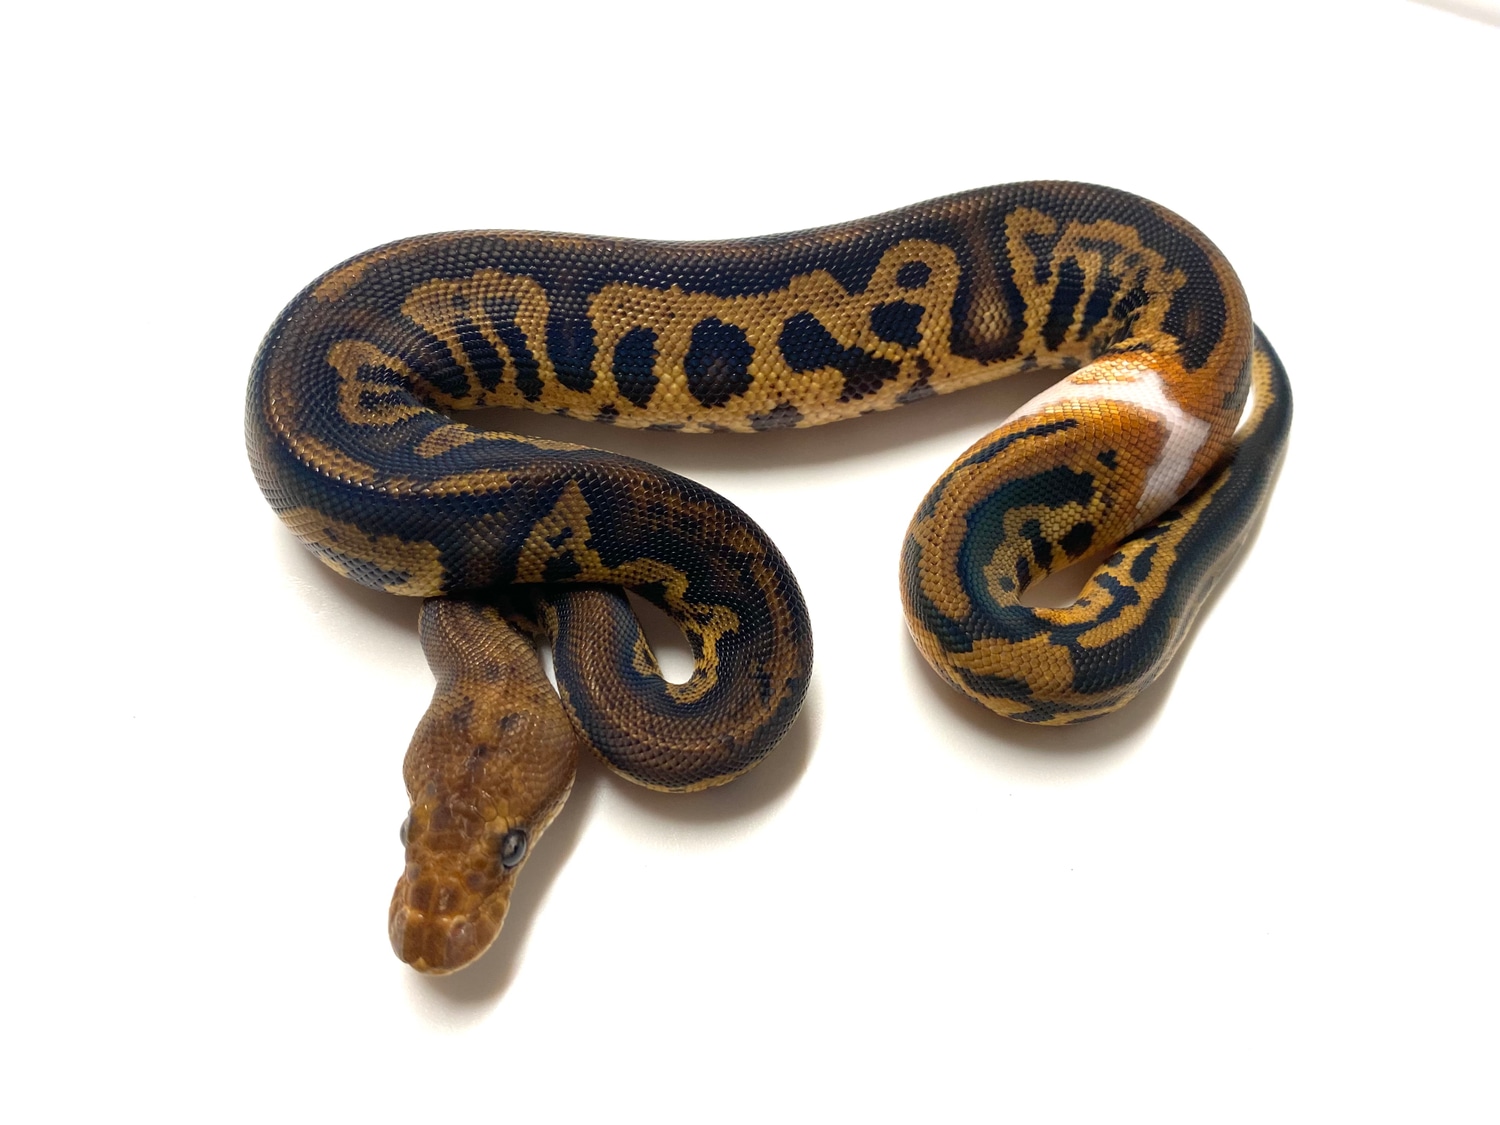 Stranger Leopard Clown Ball Python by Renowned Reptiles